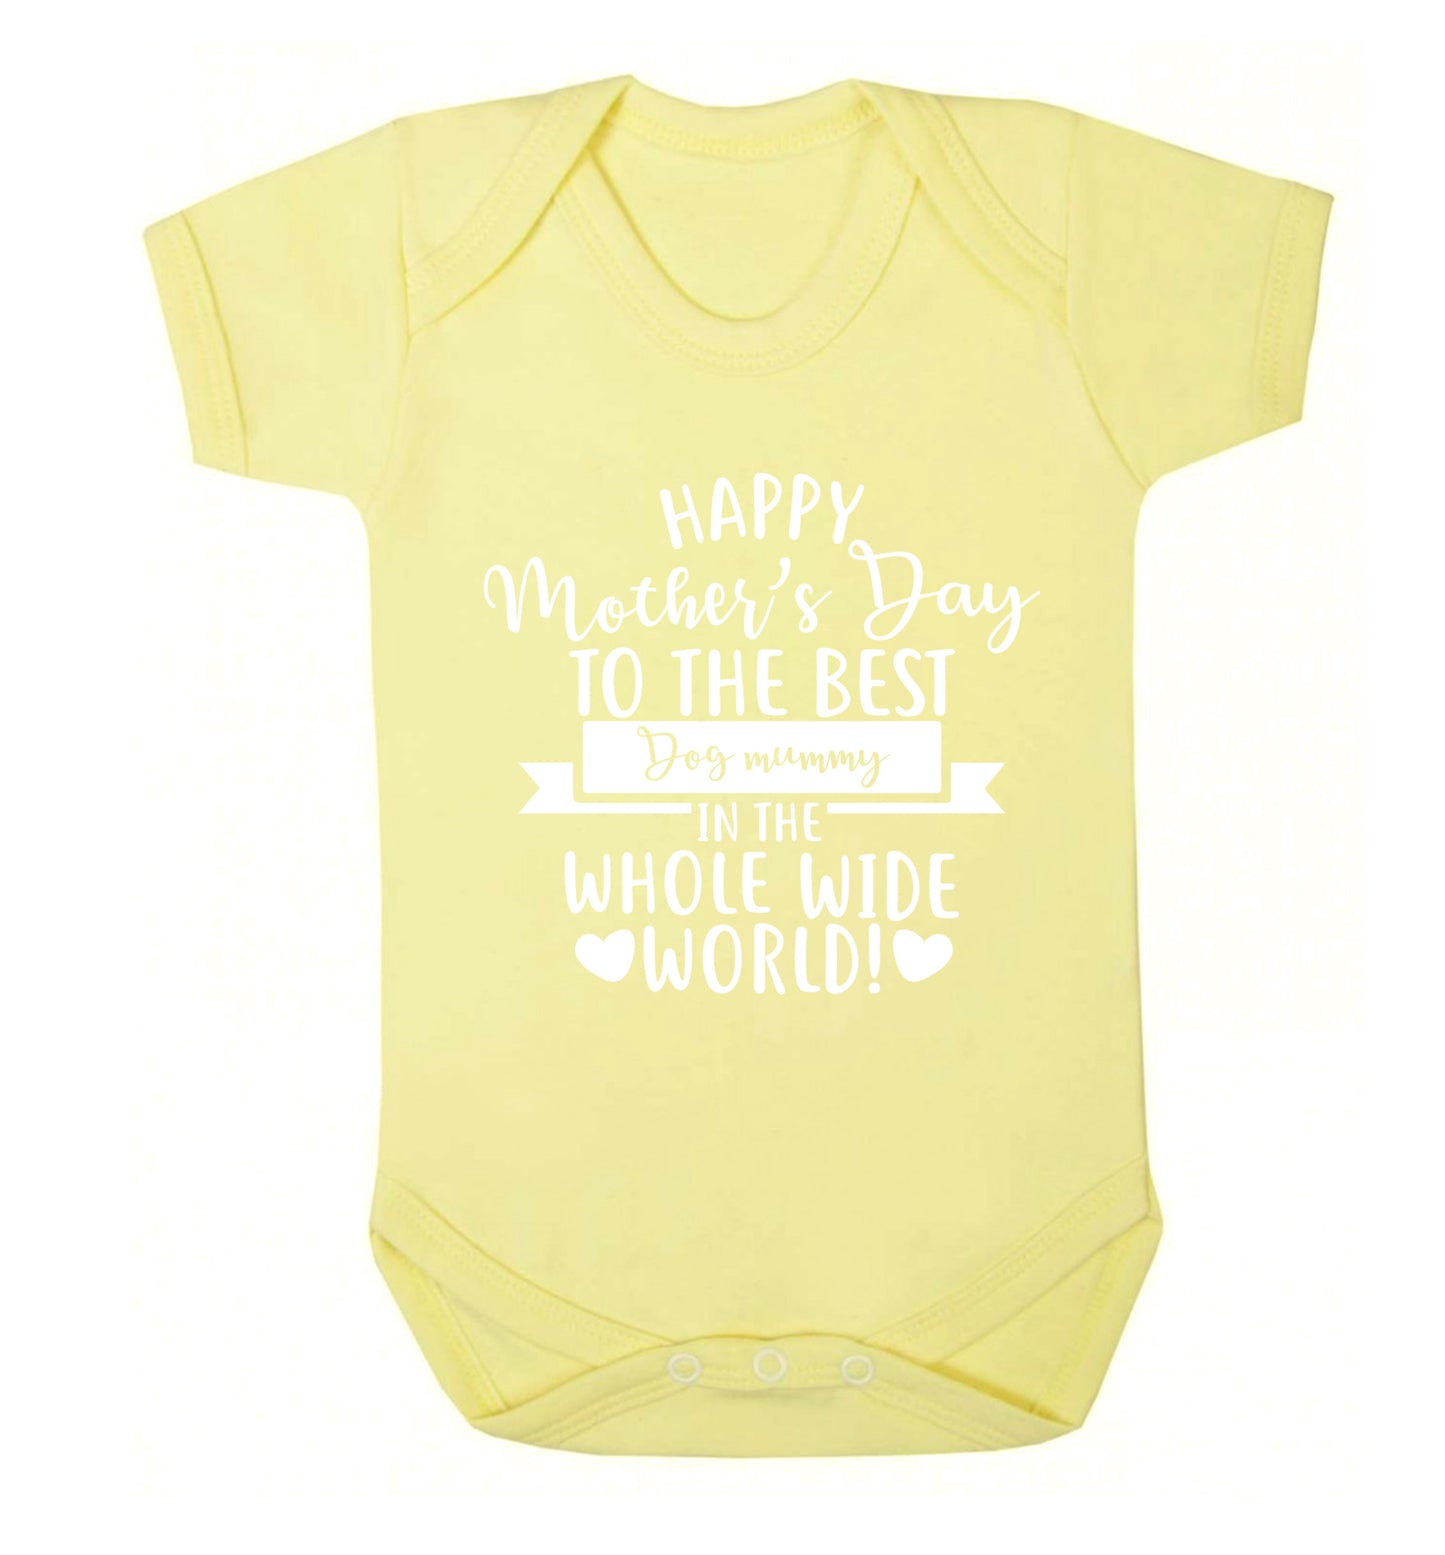 Happy mother's day to the best dog mummy in the world Baby Vest pale yellow 18-24 months